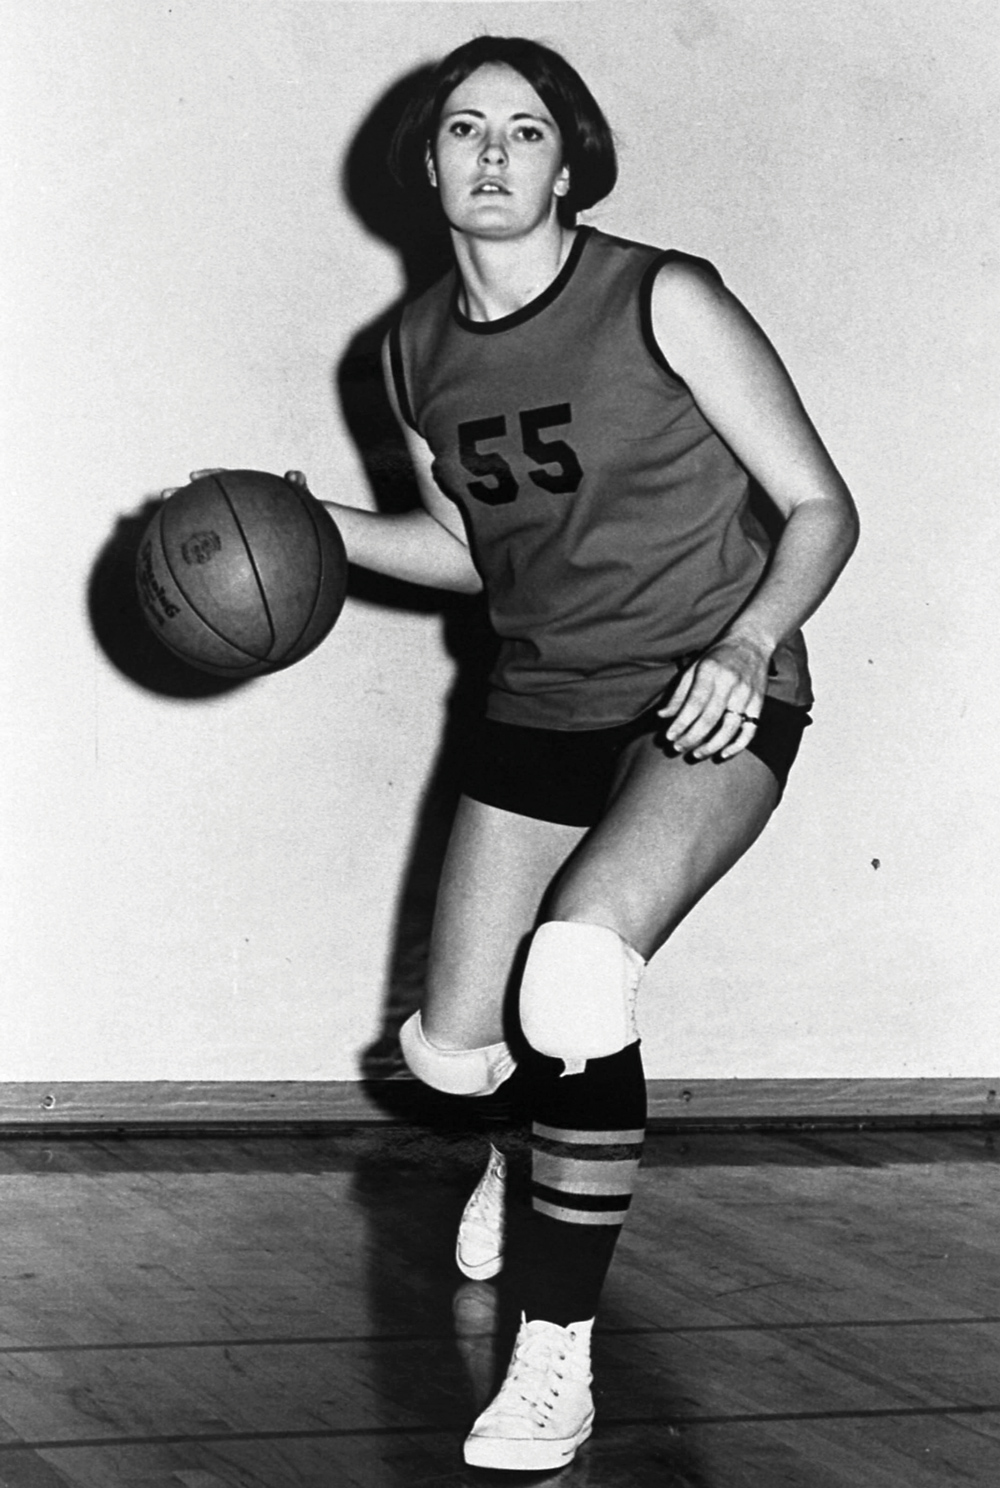 A young Pat Head photographed in her UTM uniform and Chuck Taylors with basketball in hand